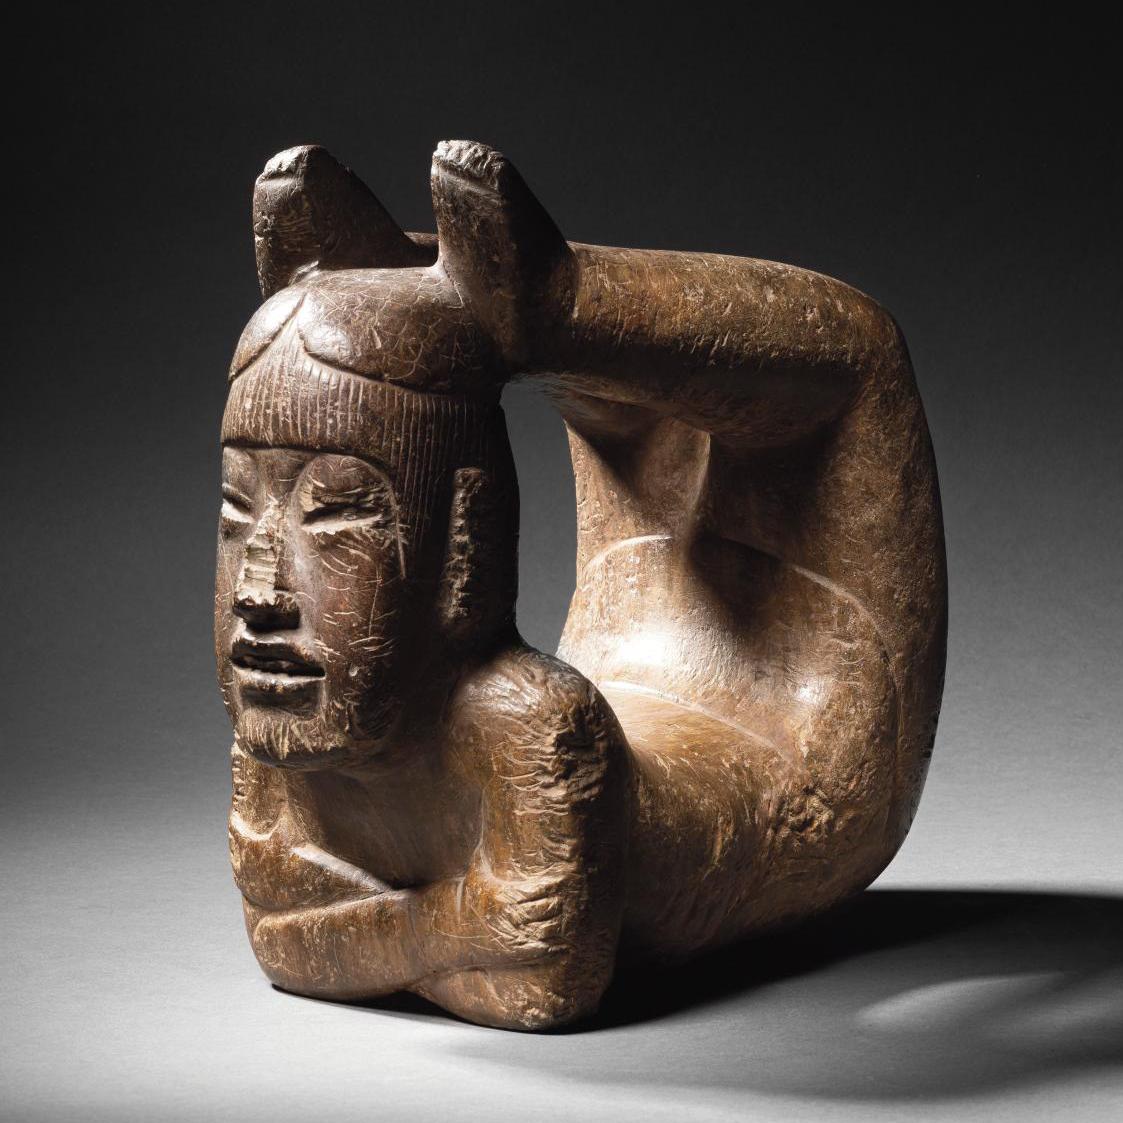 IMPORTANT AMERICAN COLLECTION OF PRE-COLUMBIAN ART - PART V